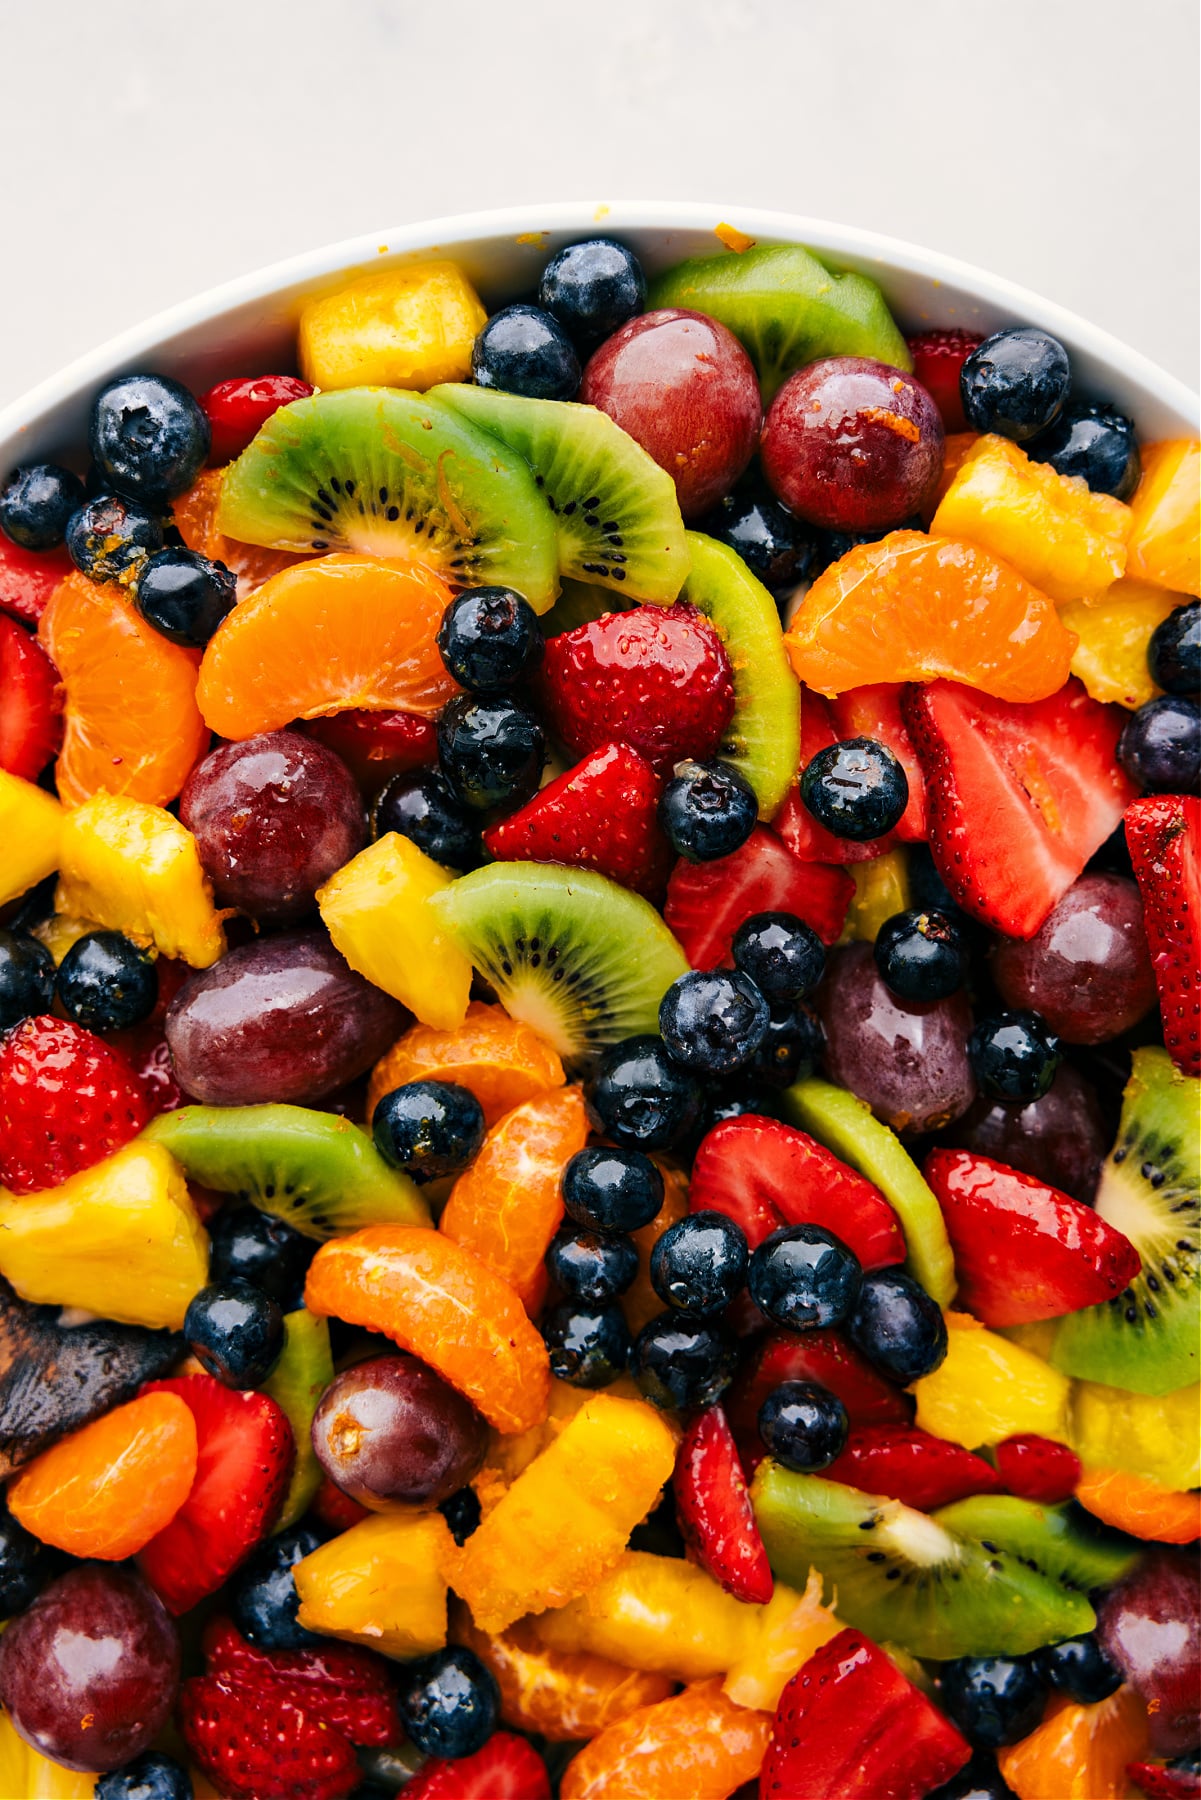 The dressed, easy fruit salad in a bowl ready to be enjoyed.